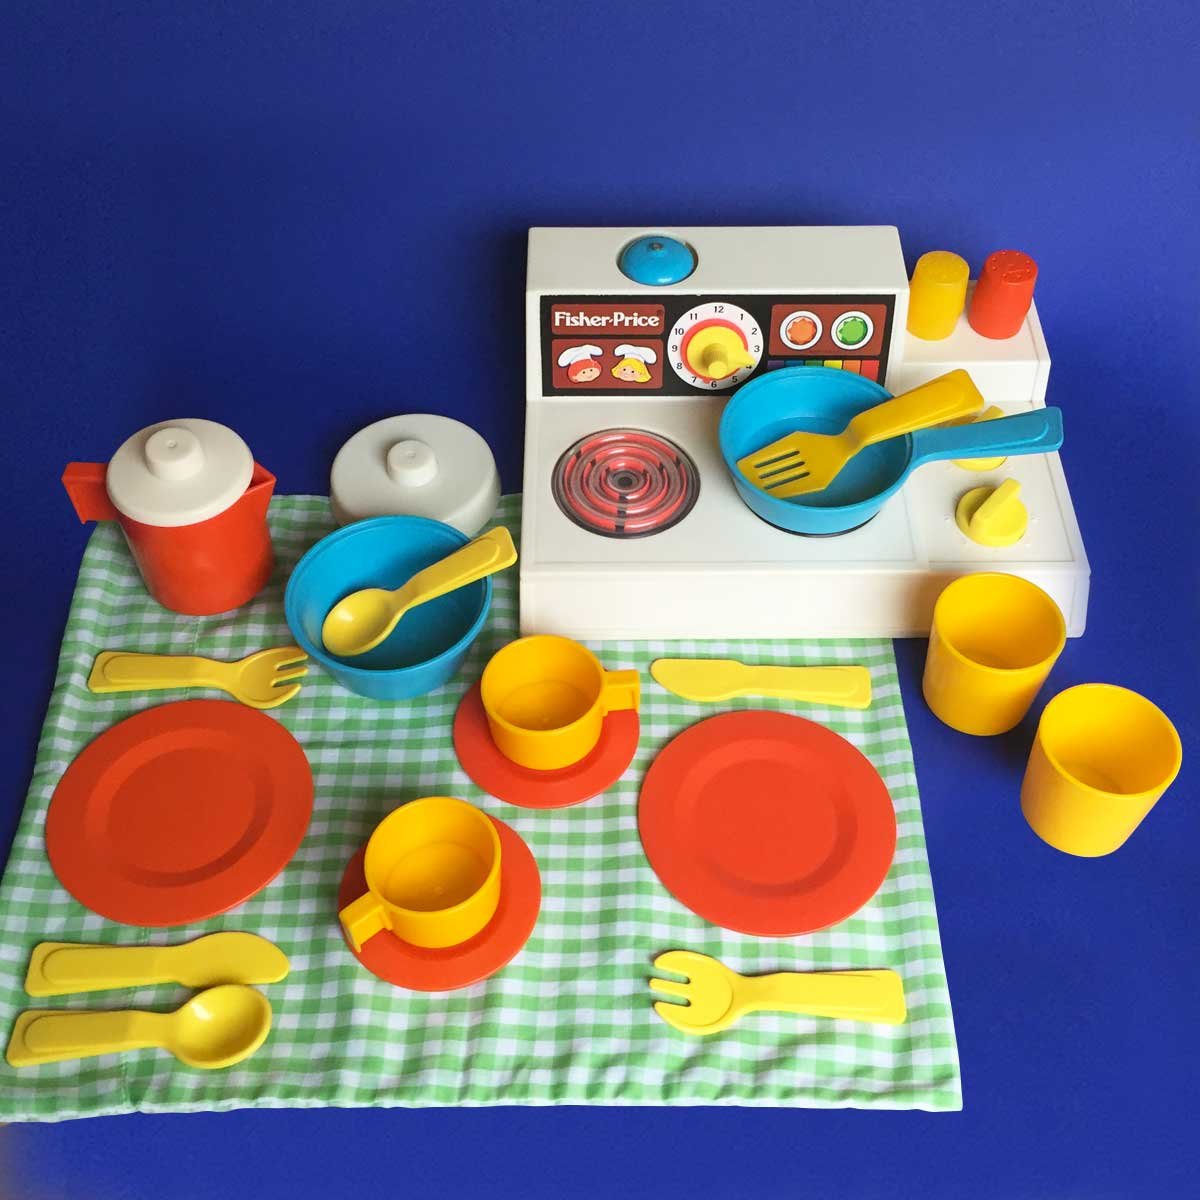 Fisher Price Cuisine 1 ?auto=format&fit=max&h=1200&w=1200